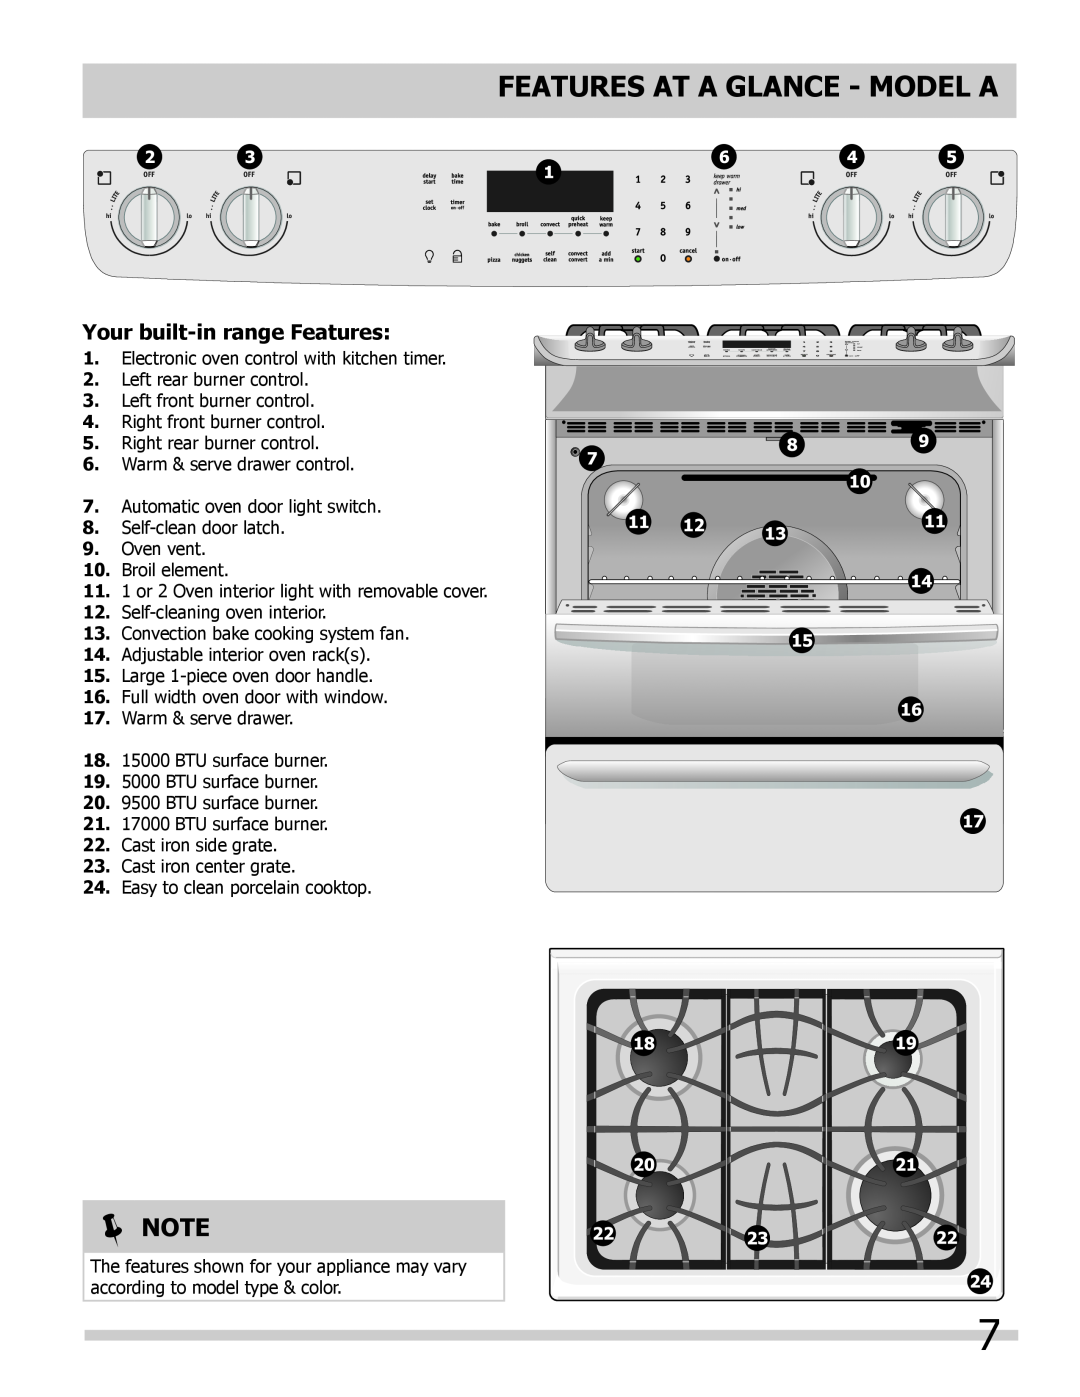 Frigidaire FPDS3085KF, FGDS3065KB, FGDS3065KW manual Features At A Glance - Model A, Your built-in range Features,  Note 